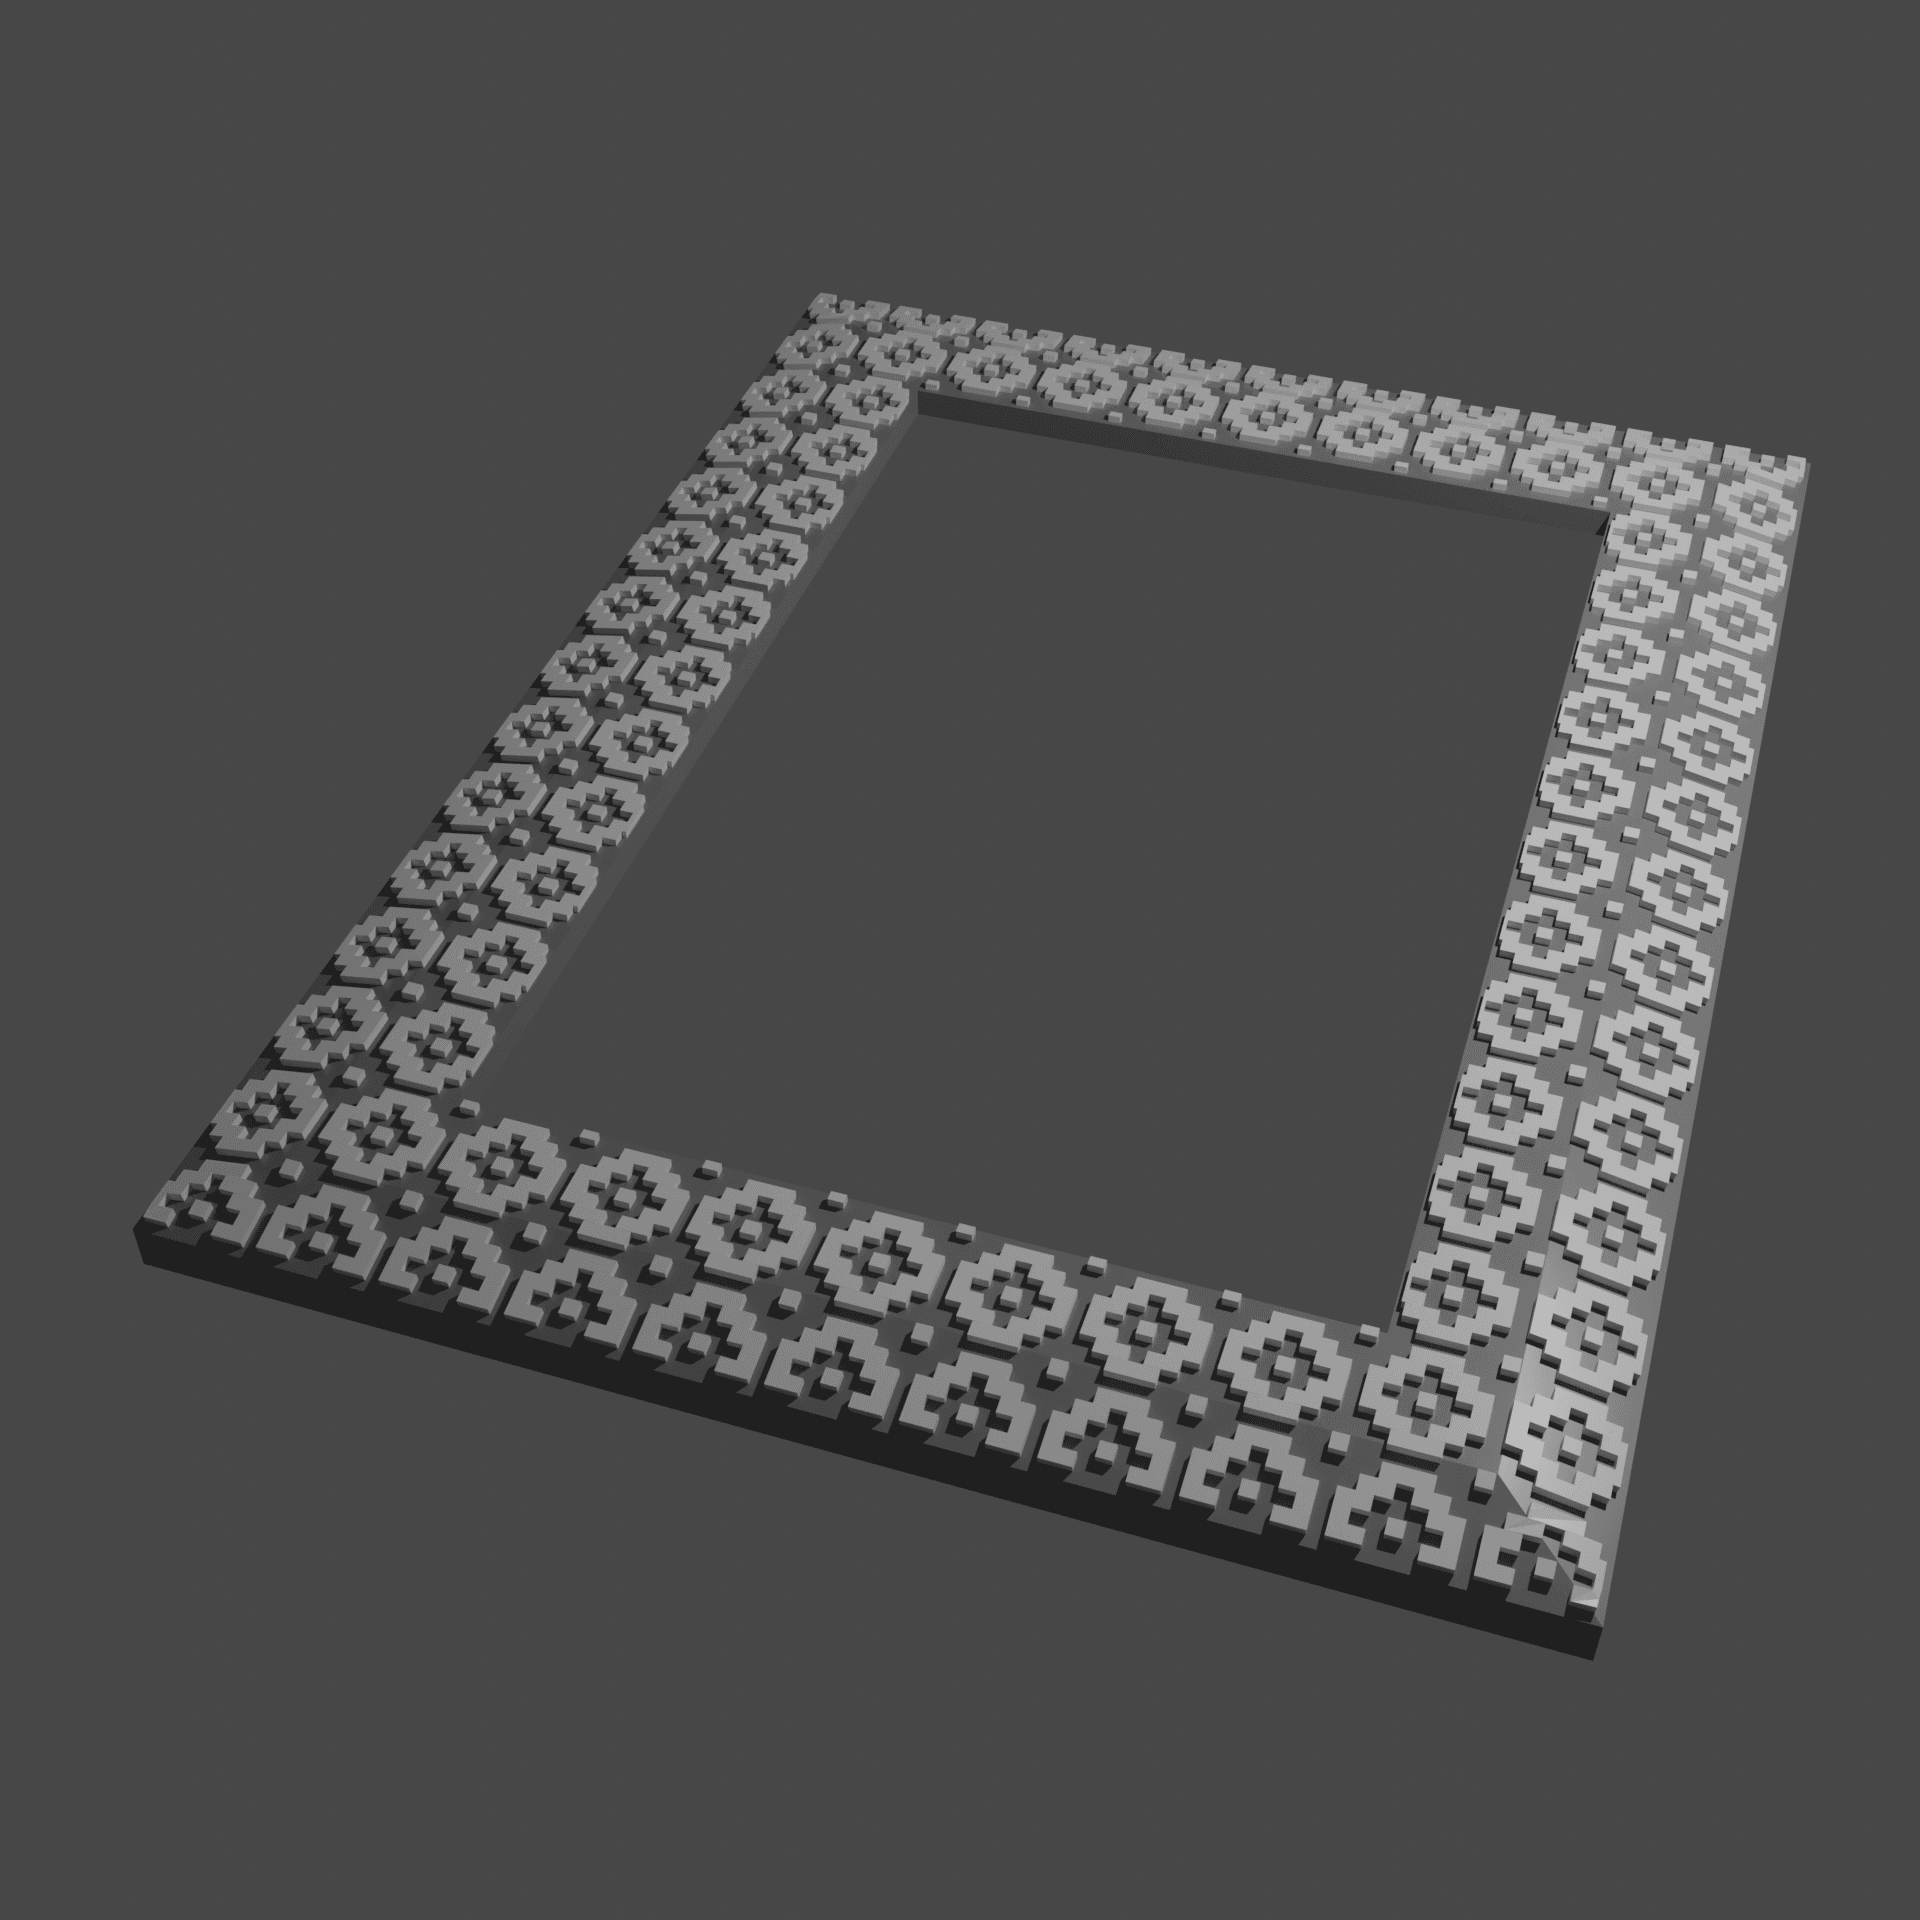 Pixel Flowers - Remix of 4x6 Picture Frame 2 3d model